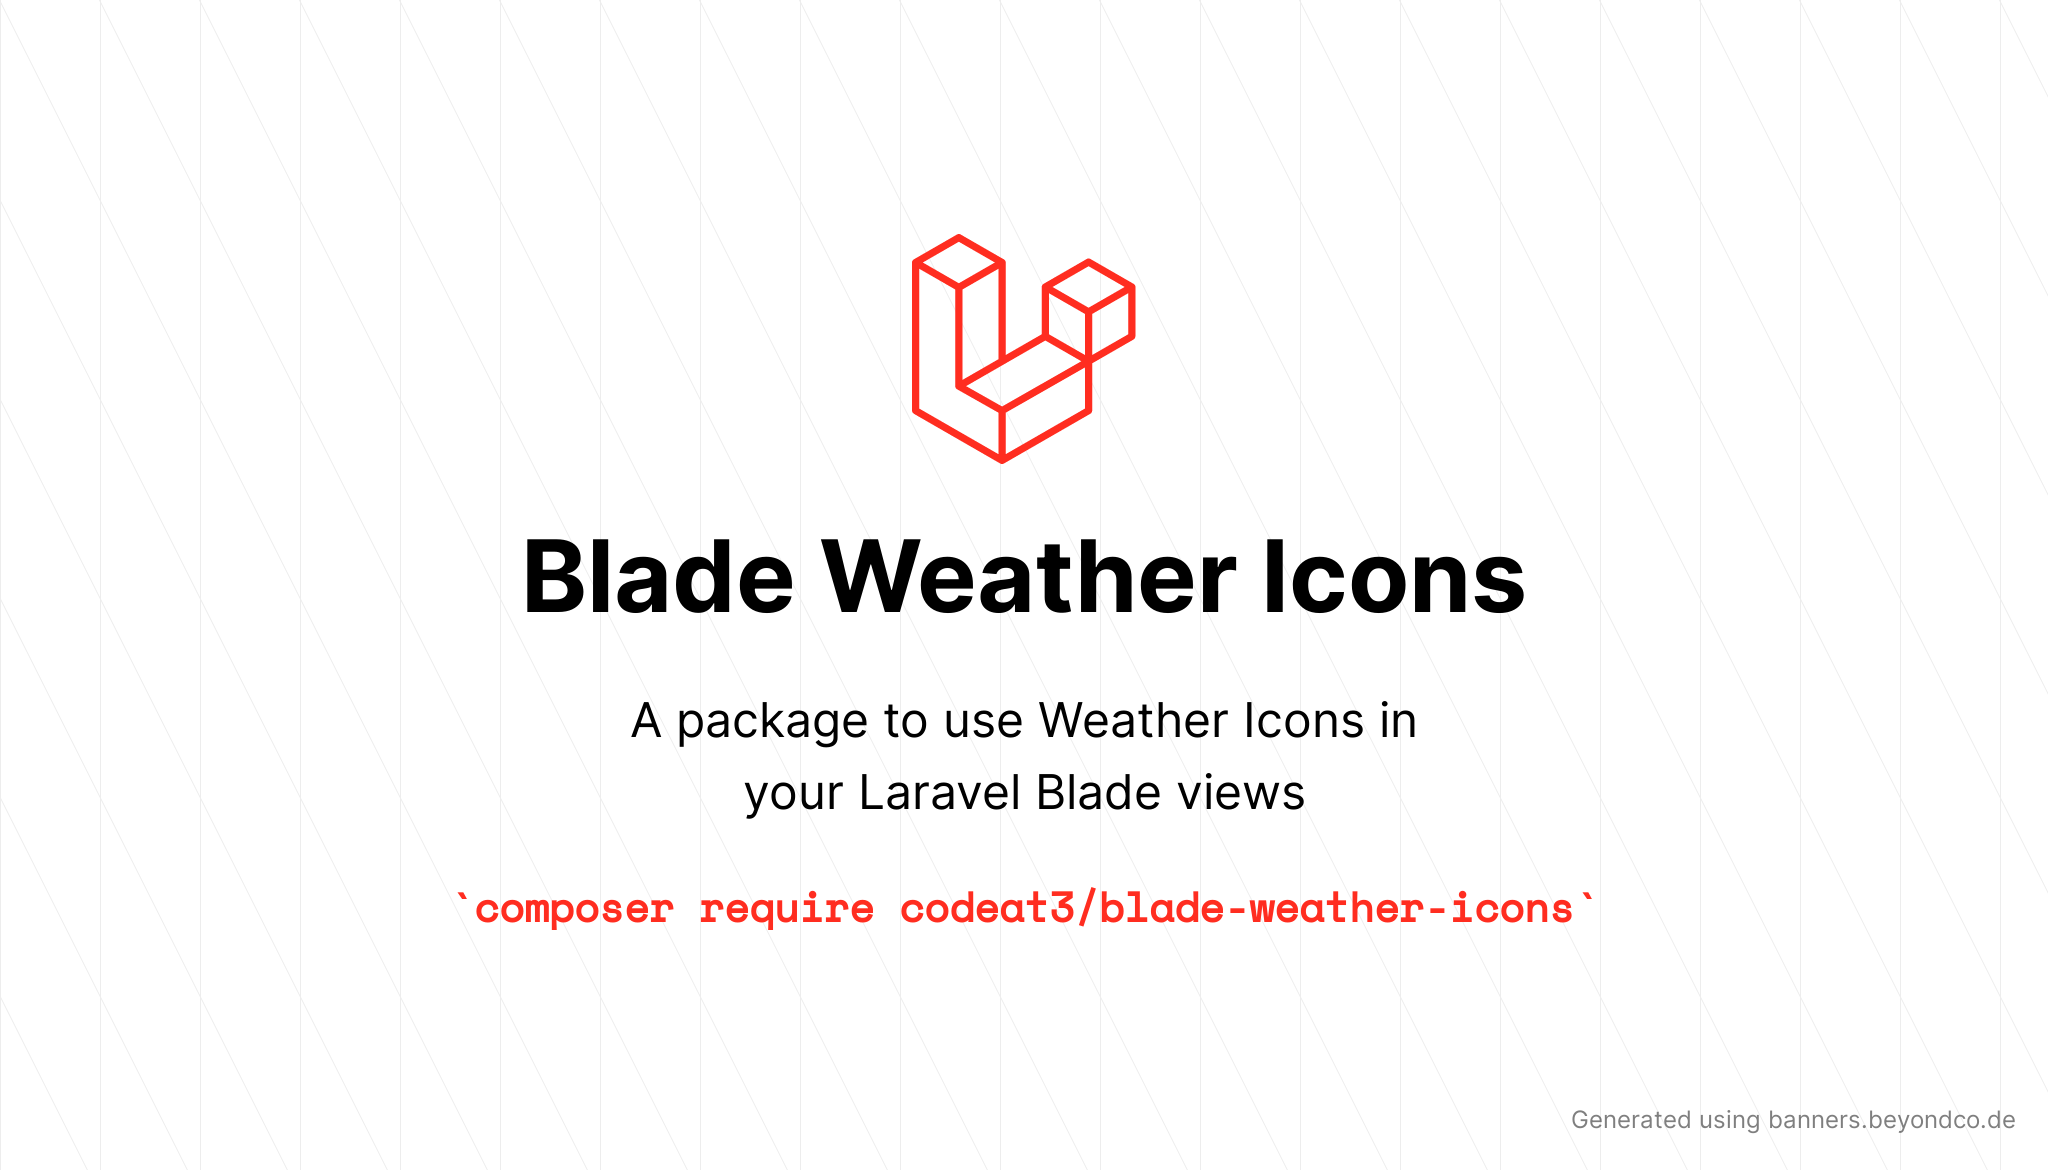 socialcard-blade-weather-icons.png